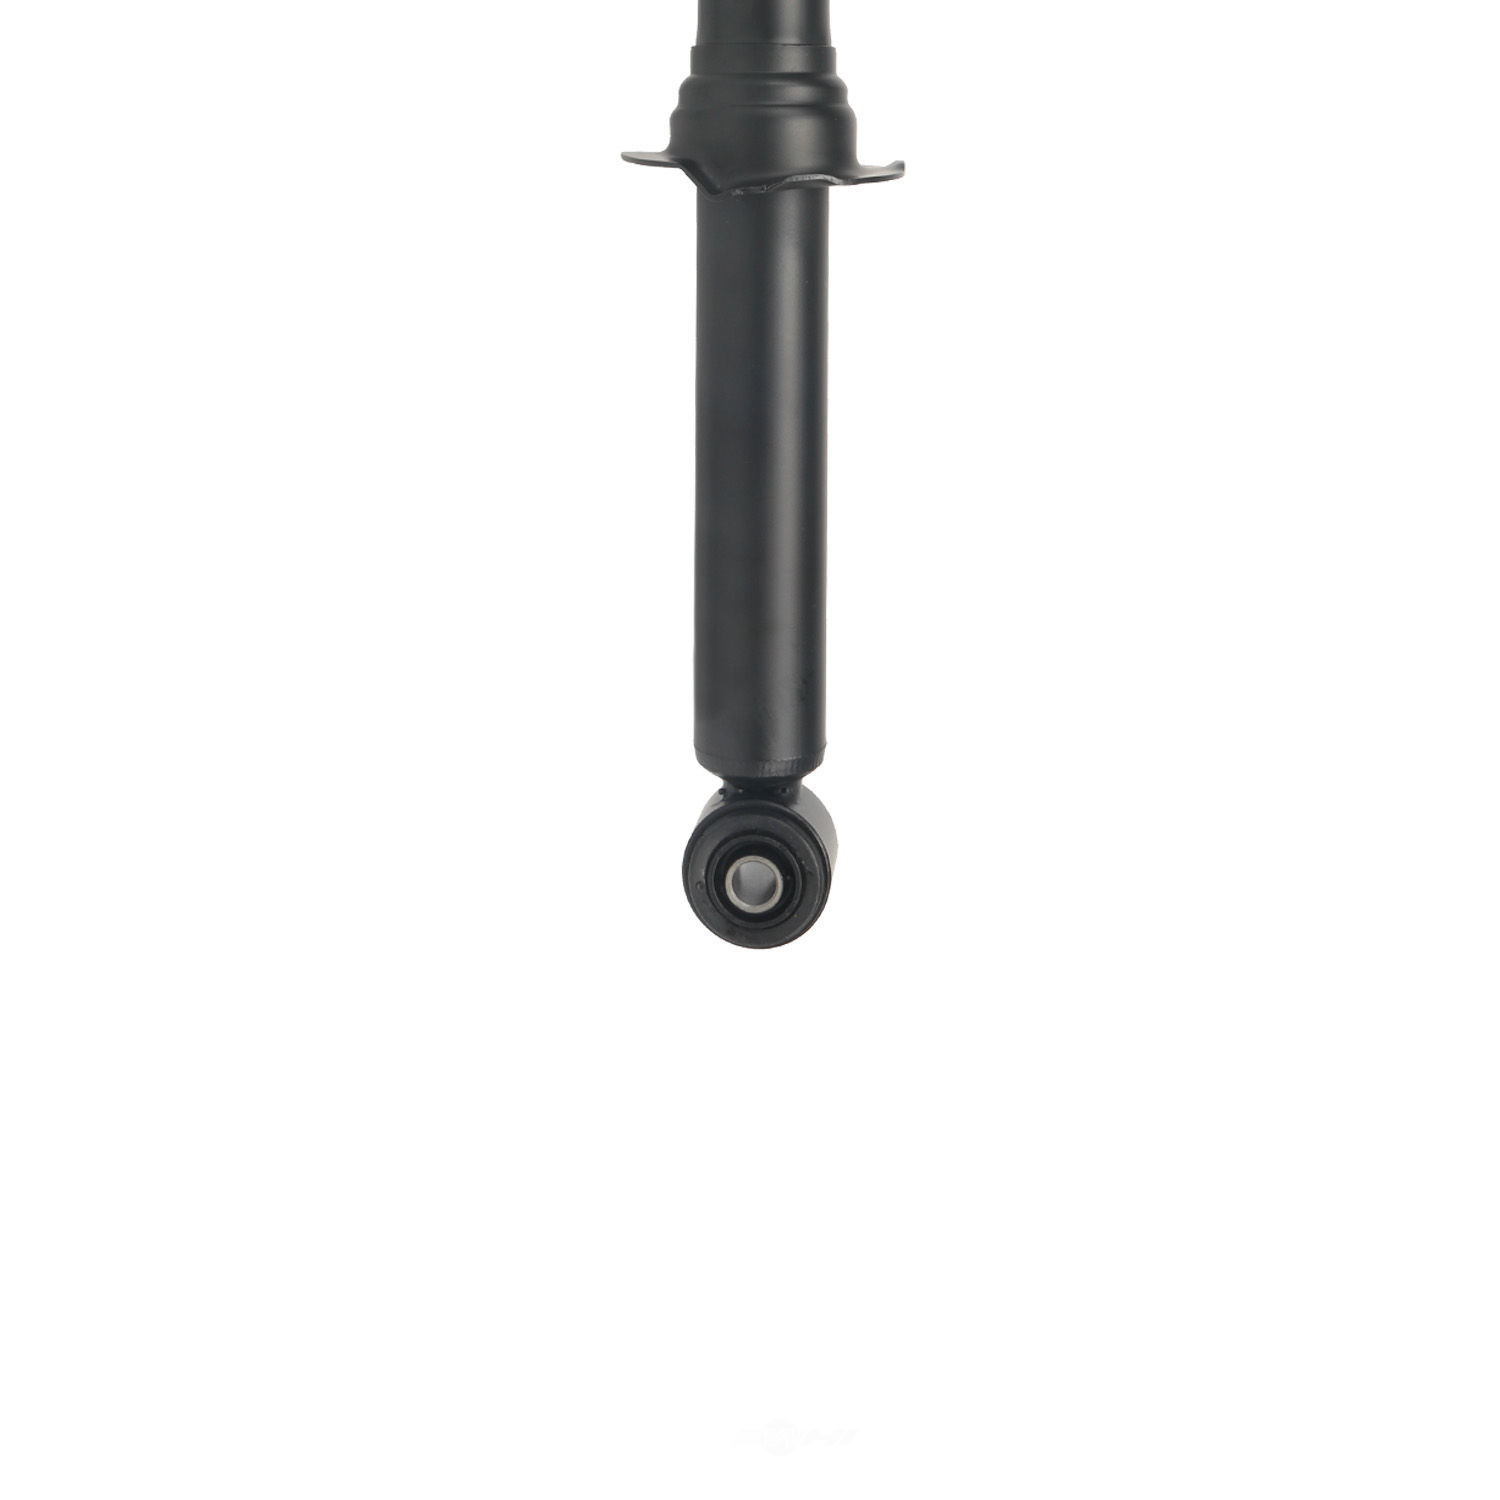 PERFORMANCE RIDE TECHNOLOGY BY ADD - Suspension Strut Assembly - P6T 372003